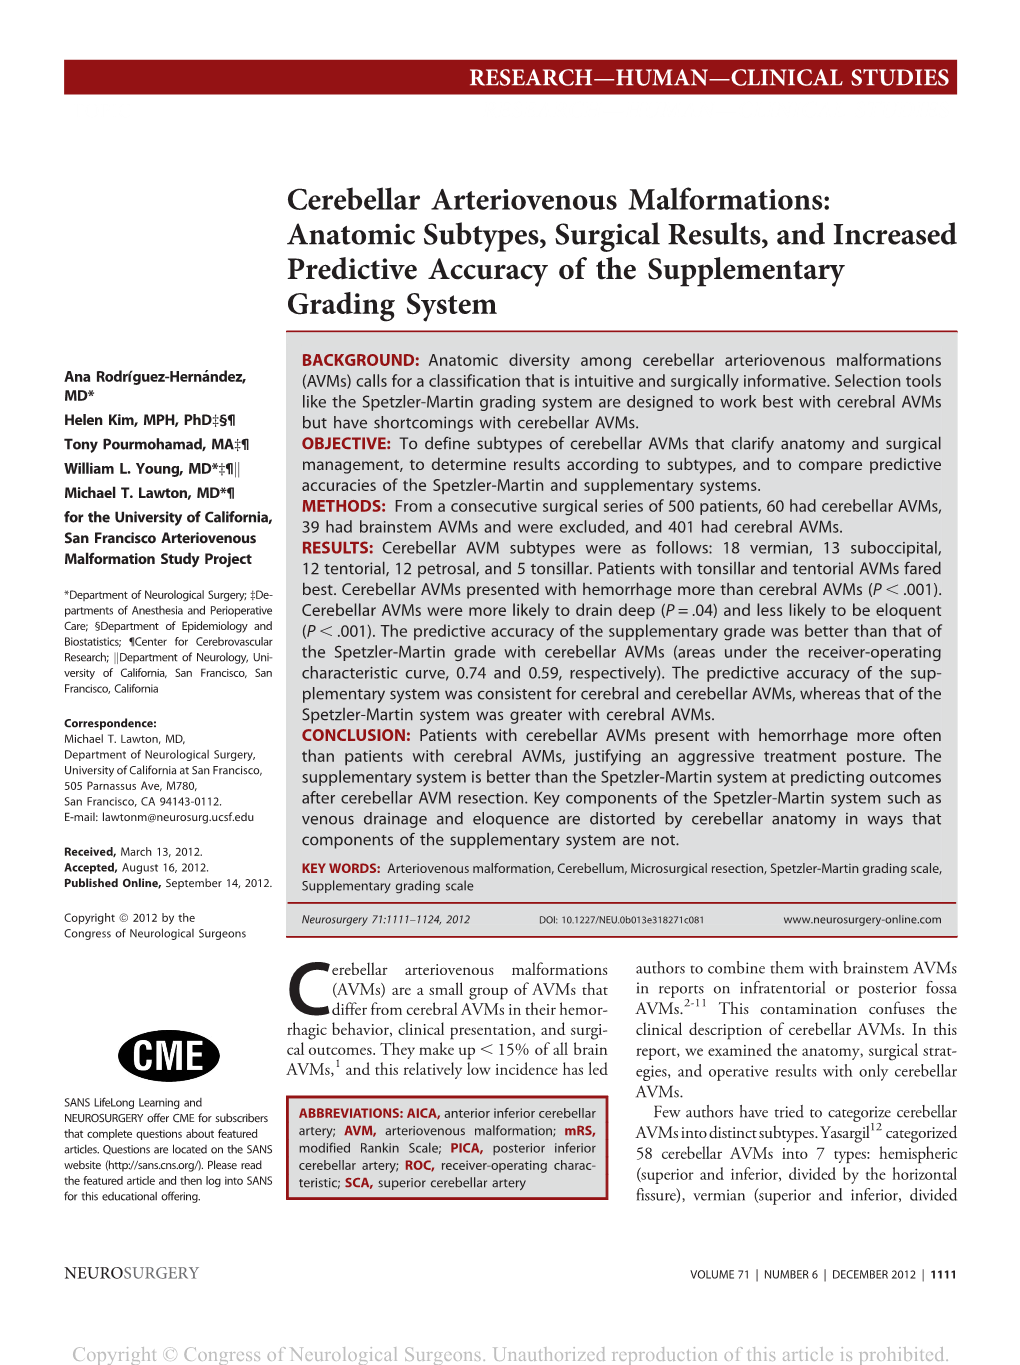 Cerebellar Arteriovenous Malformations: Anatomic Subtypes, Surgical Results, and Increased Predictive Accuracy of the Supplementary Grading System